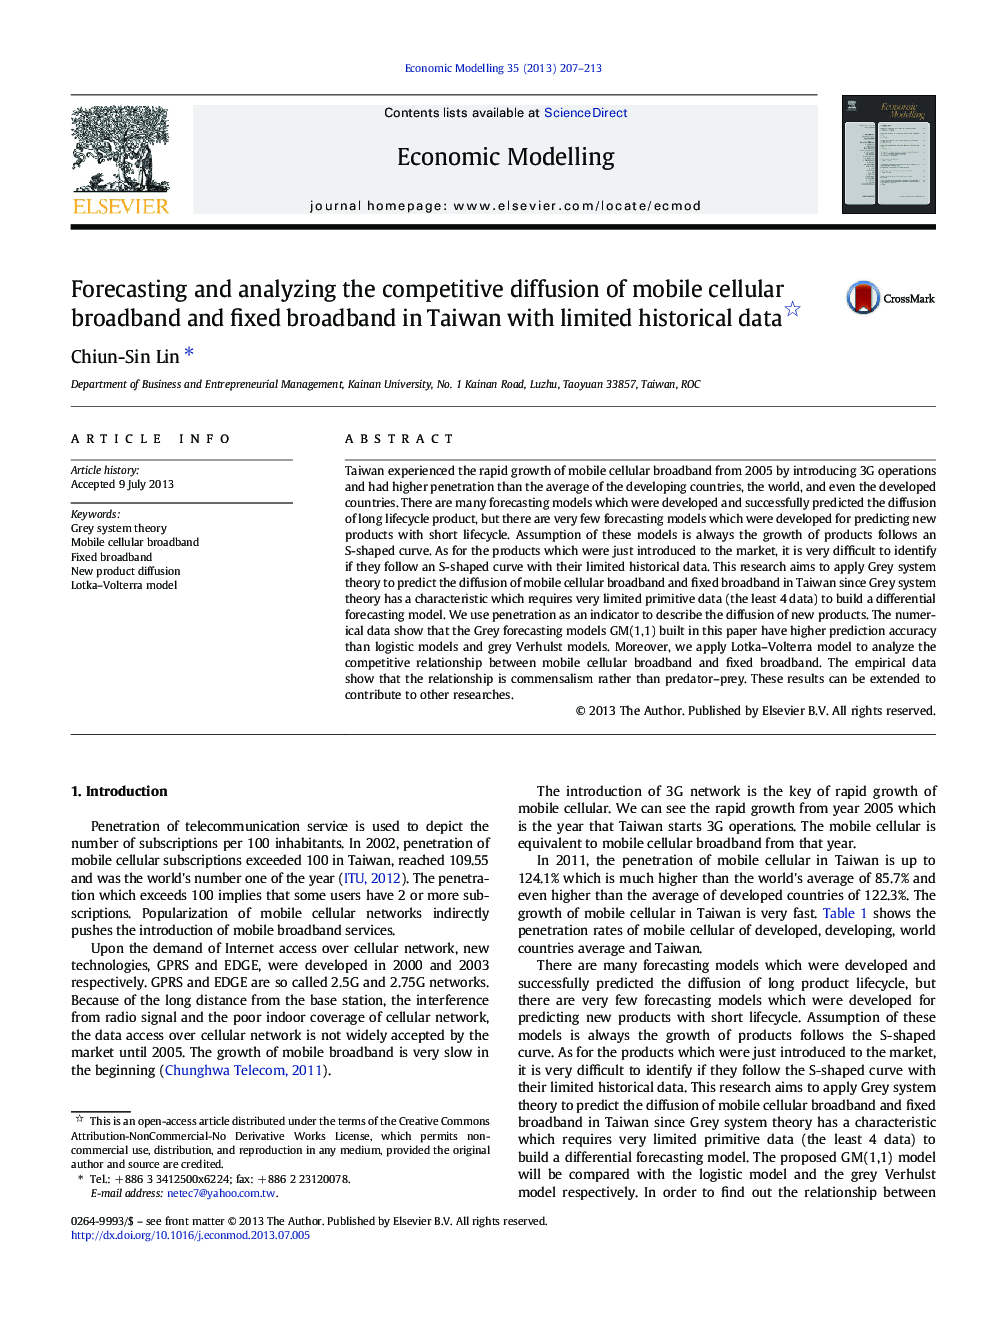 Forecasting and analyzing the competitive diffusion of mobile cellular broadband and fixed broadband in Taiwan with limited historical data